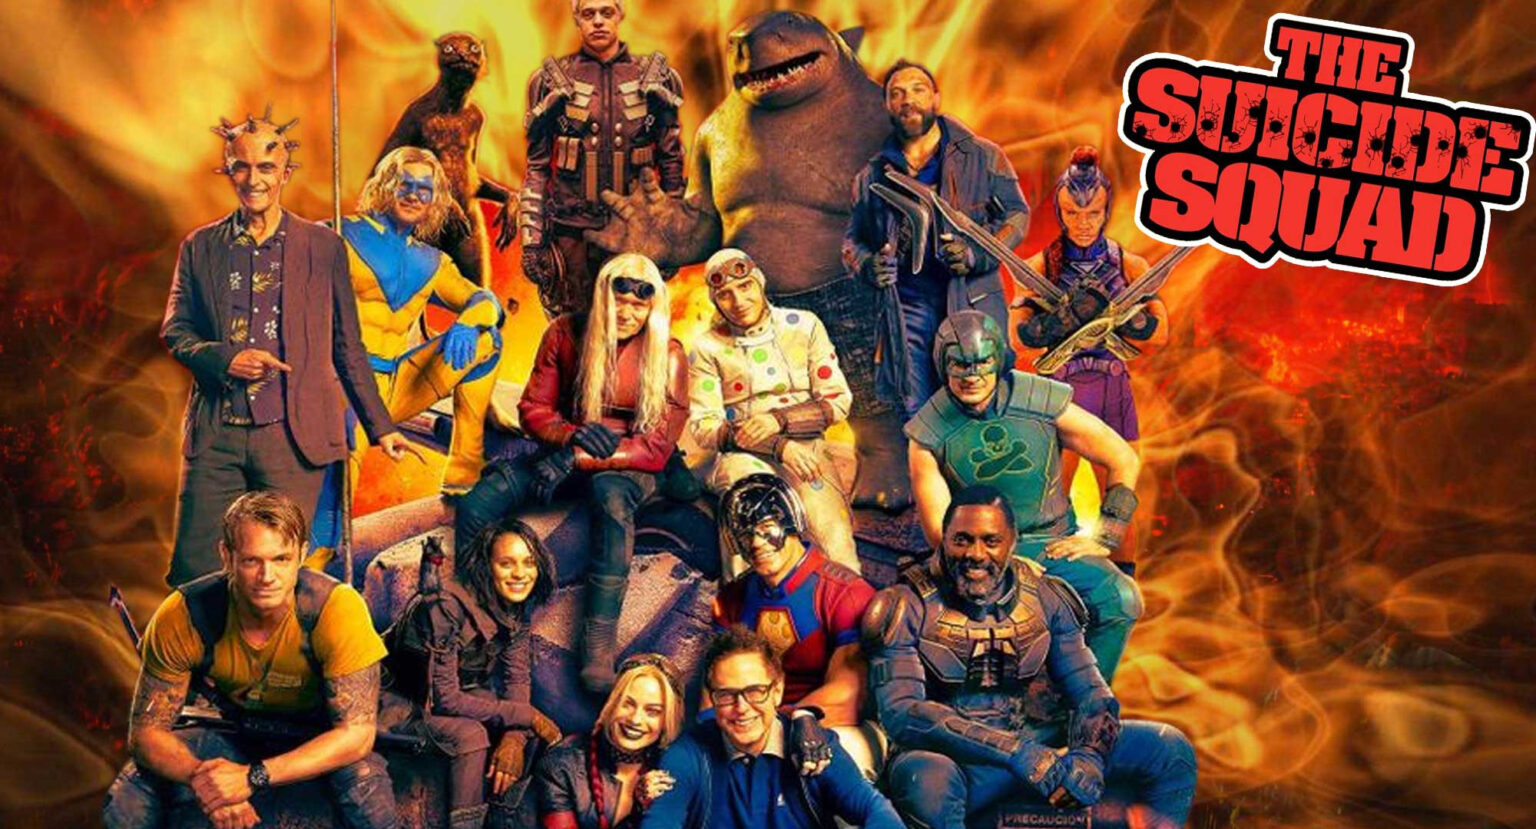 What's going to happen in DC's 'The Suicide Squad'? Delve into everything we know about this sequel/reboot hybrid right now!